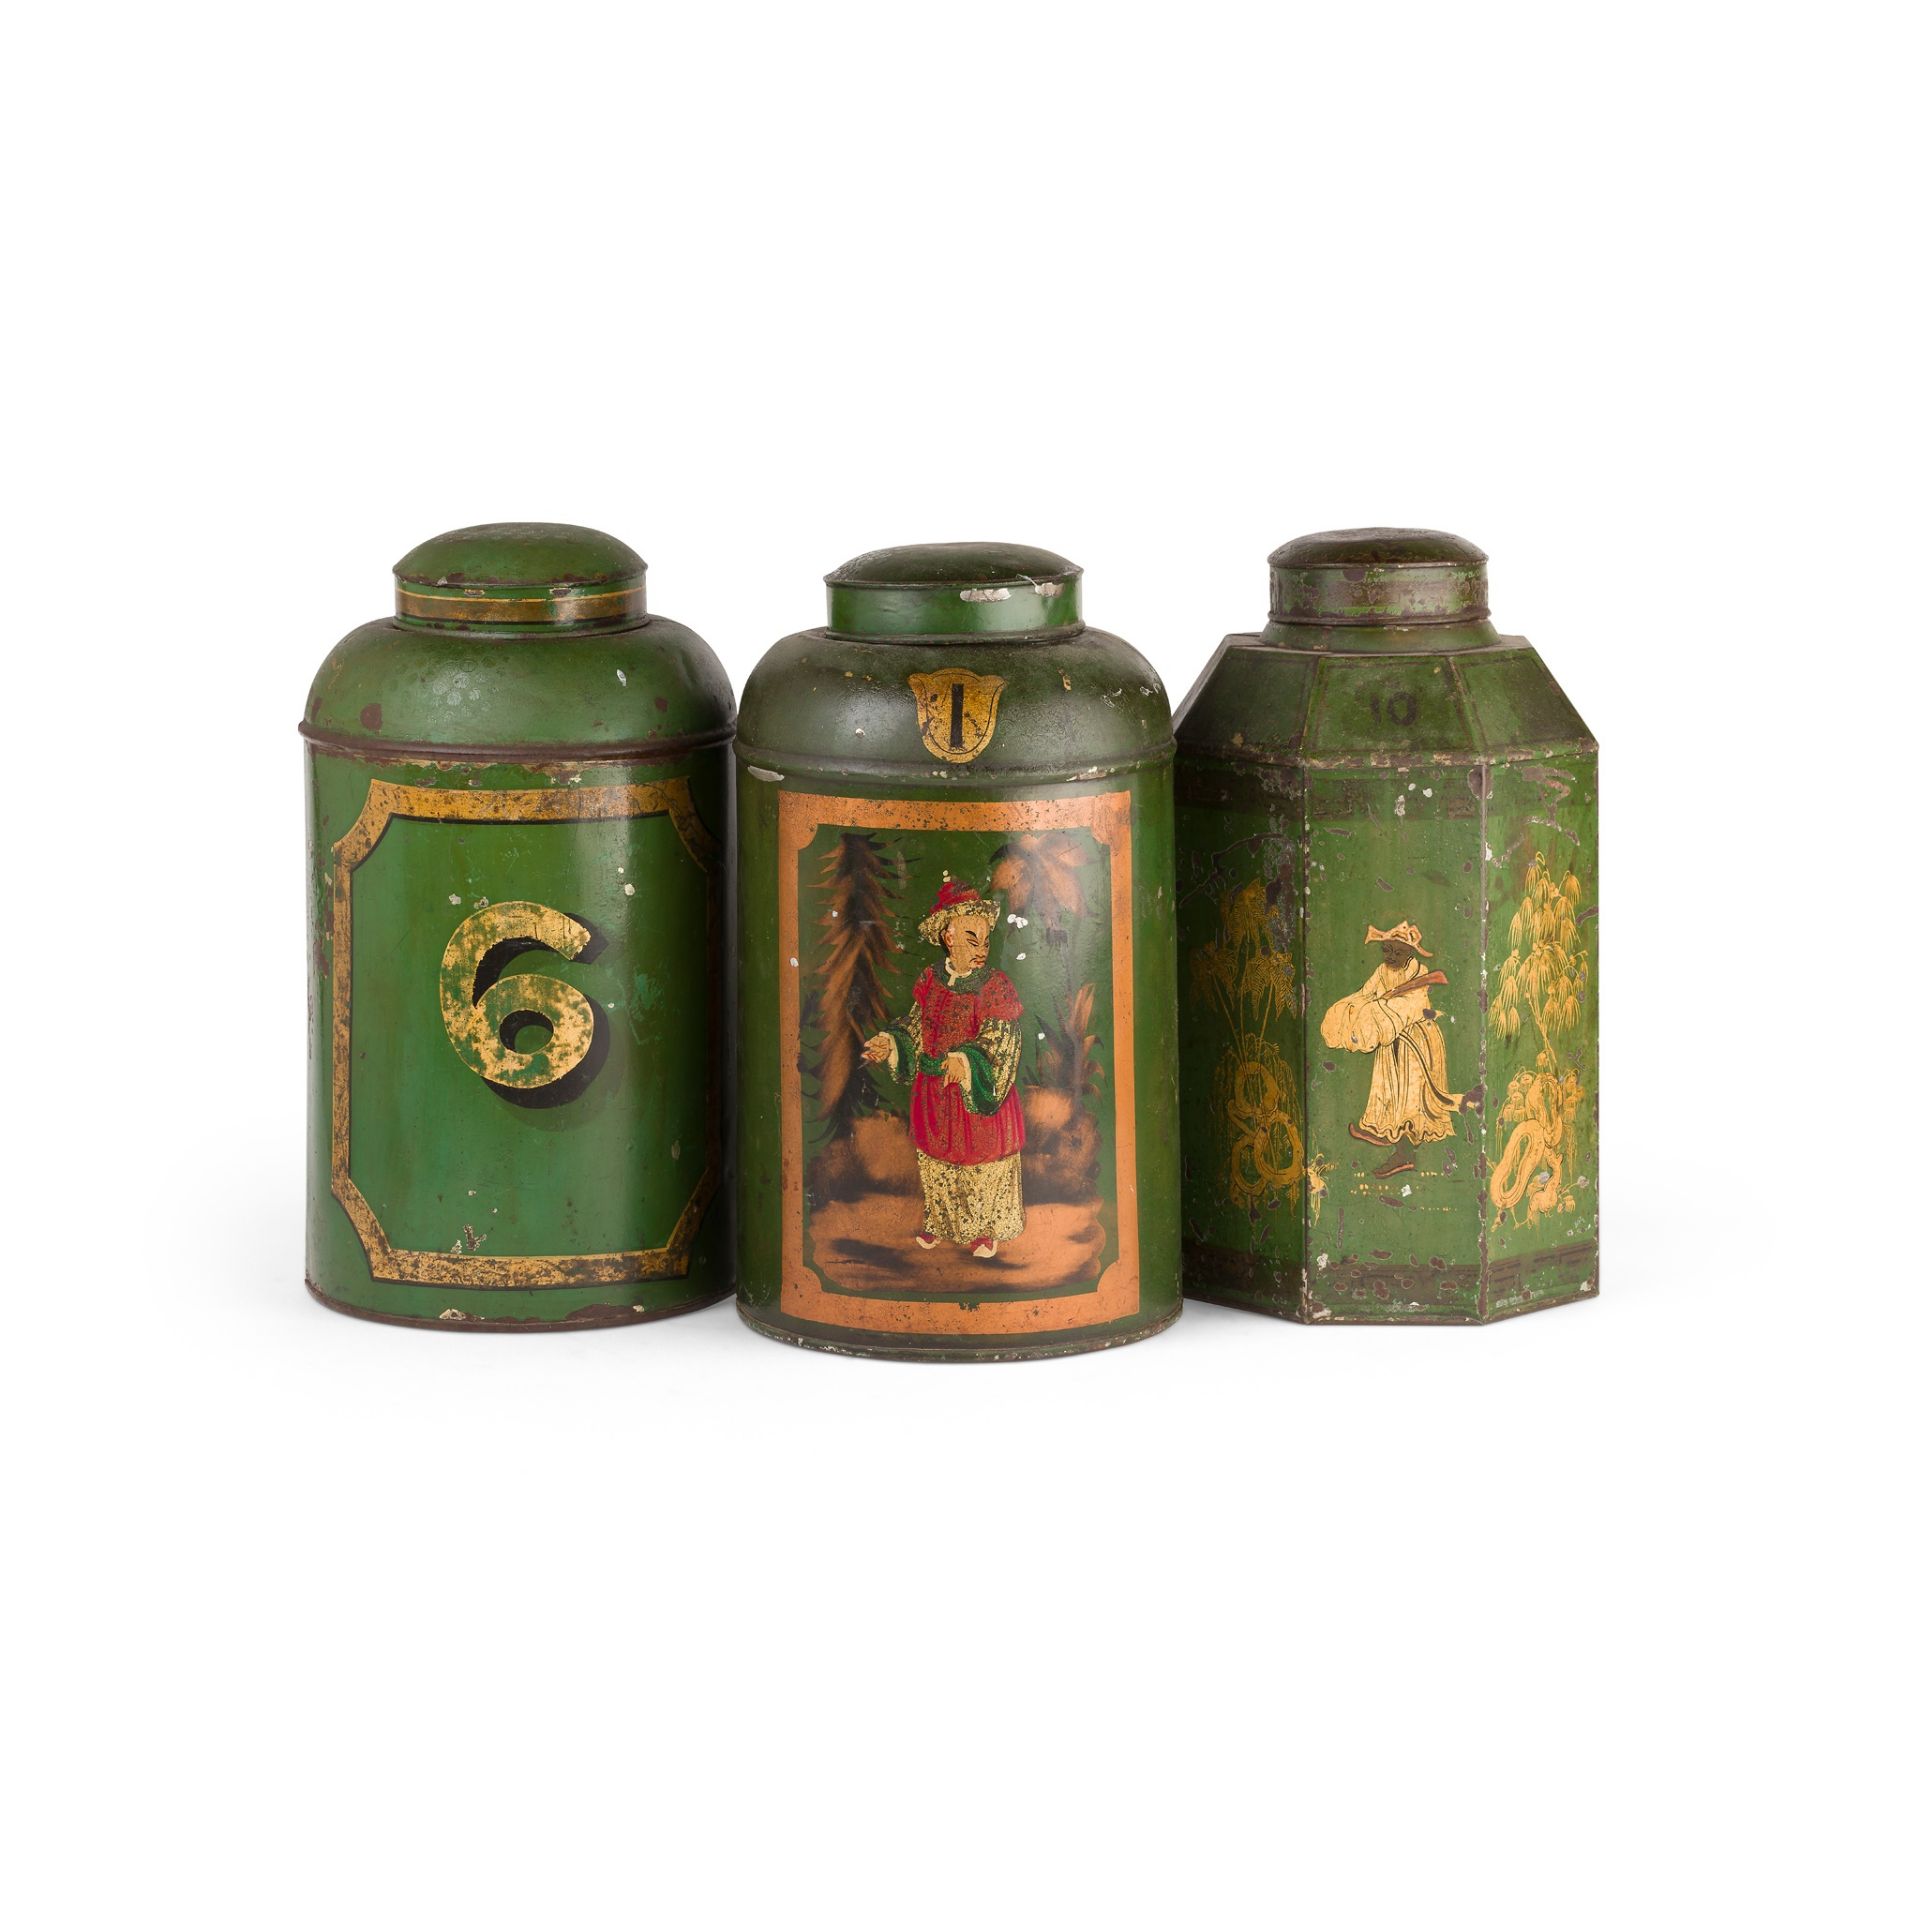 THREE TOLE PAINTED TEA CANISTERS 19TH CENTURY